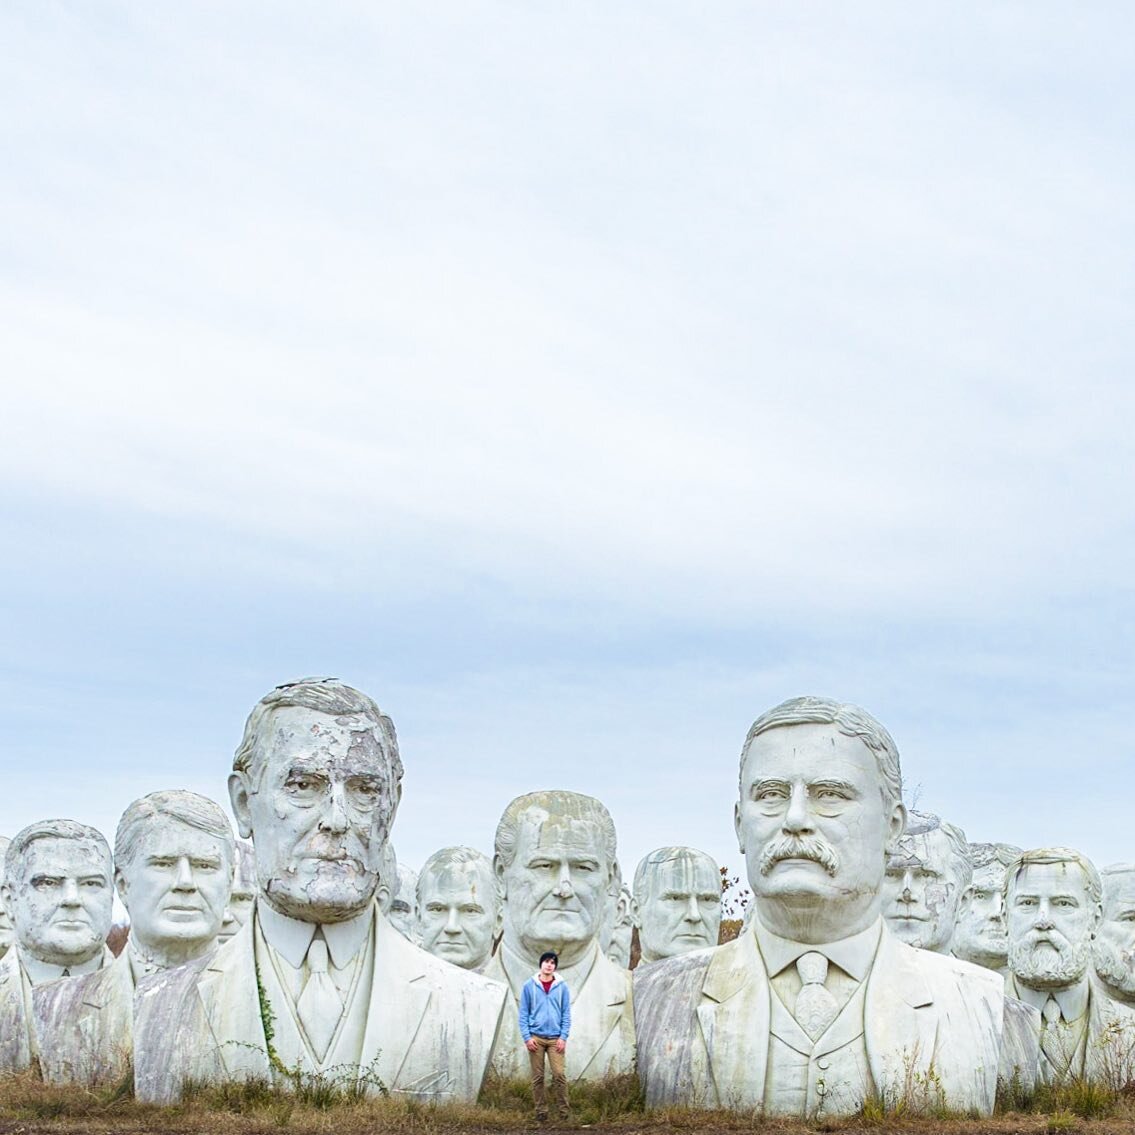 We visit the infamous Presidents Heads in Virginia. These 43 20 ft high busts of the US Presidents sit on a farm and can only be seen by a private tour - check out the latest Tales from the Trail on the website  for details on our experience and how 